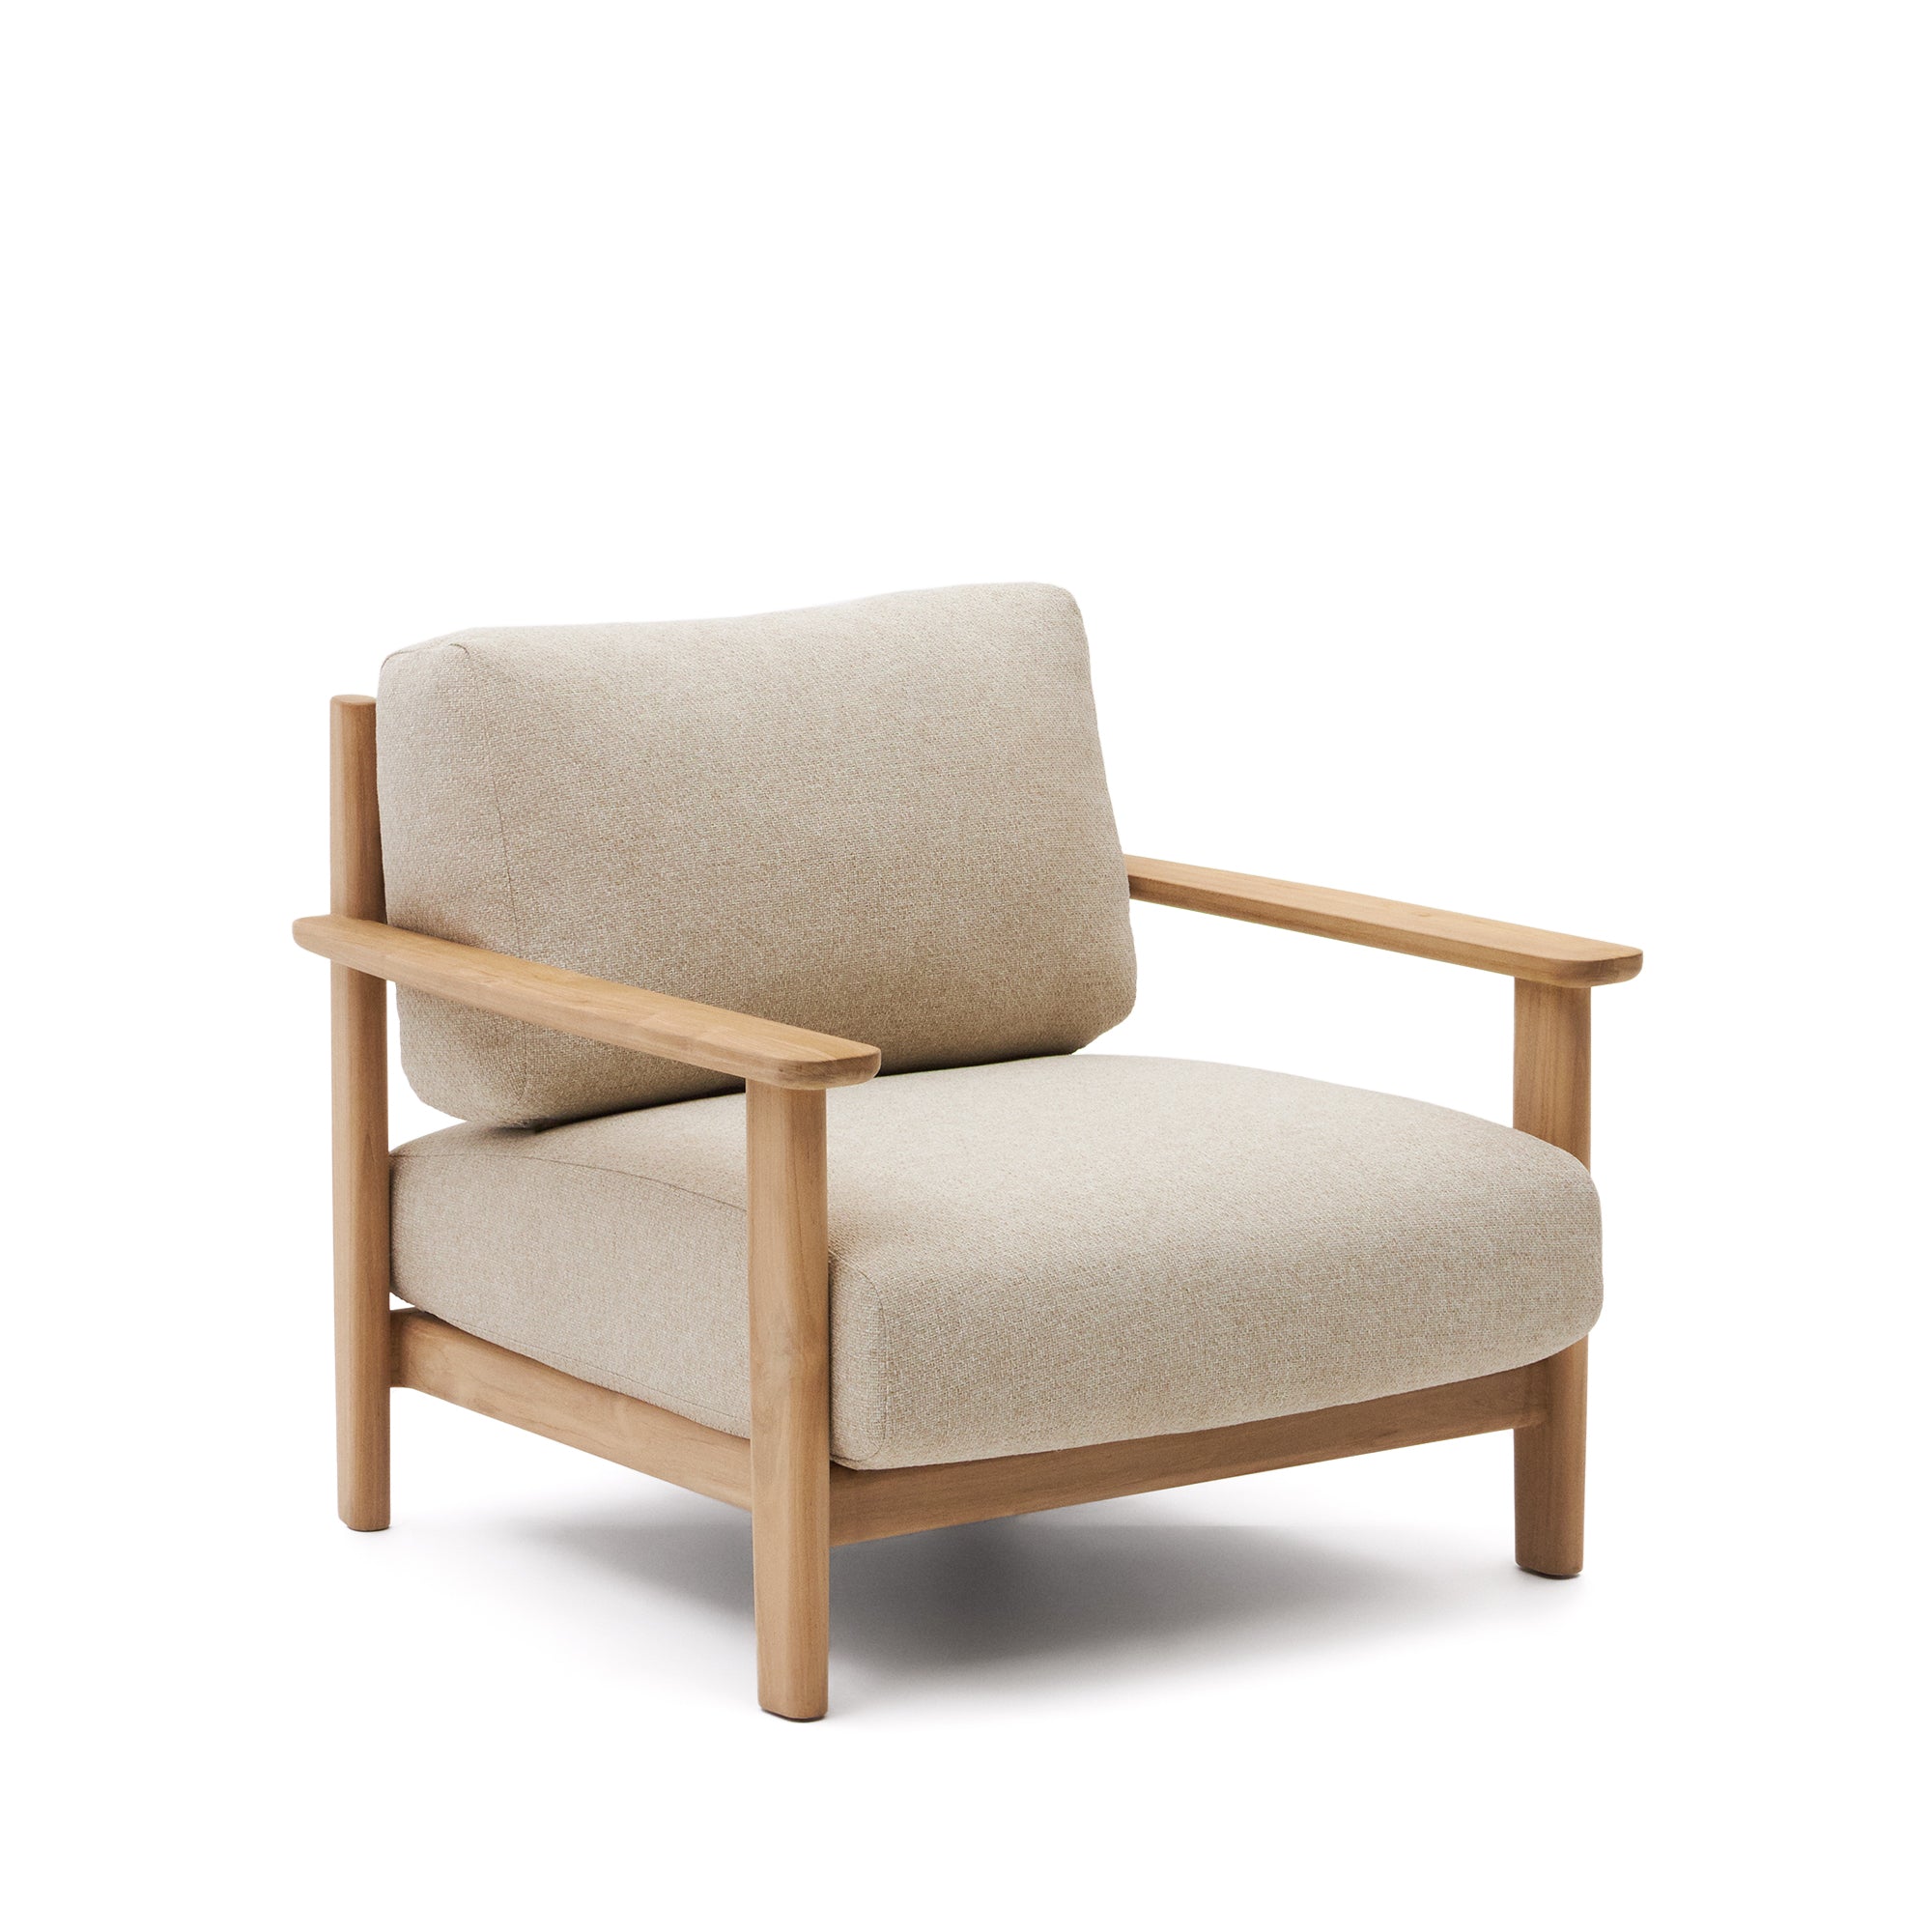 Tirant armchair, made of 100% FSC certified solid teak wood